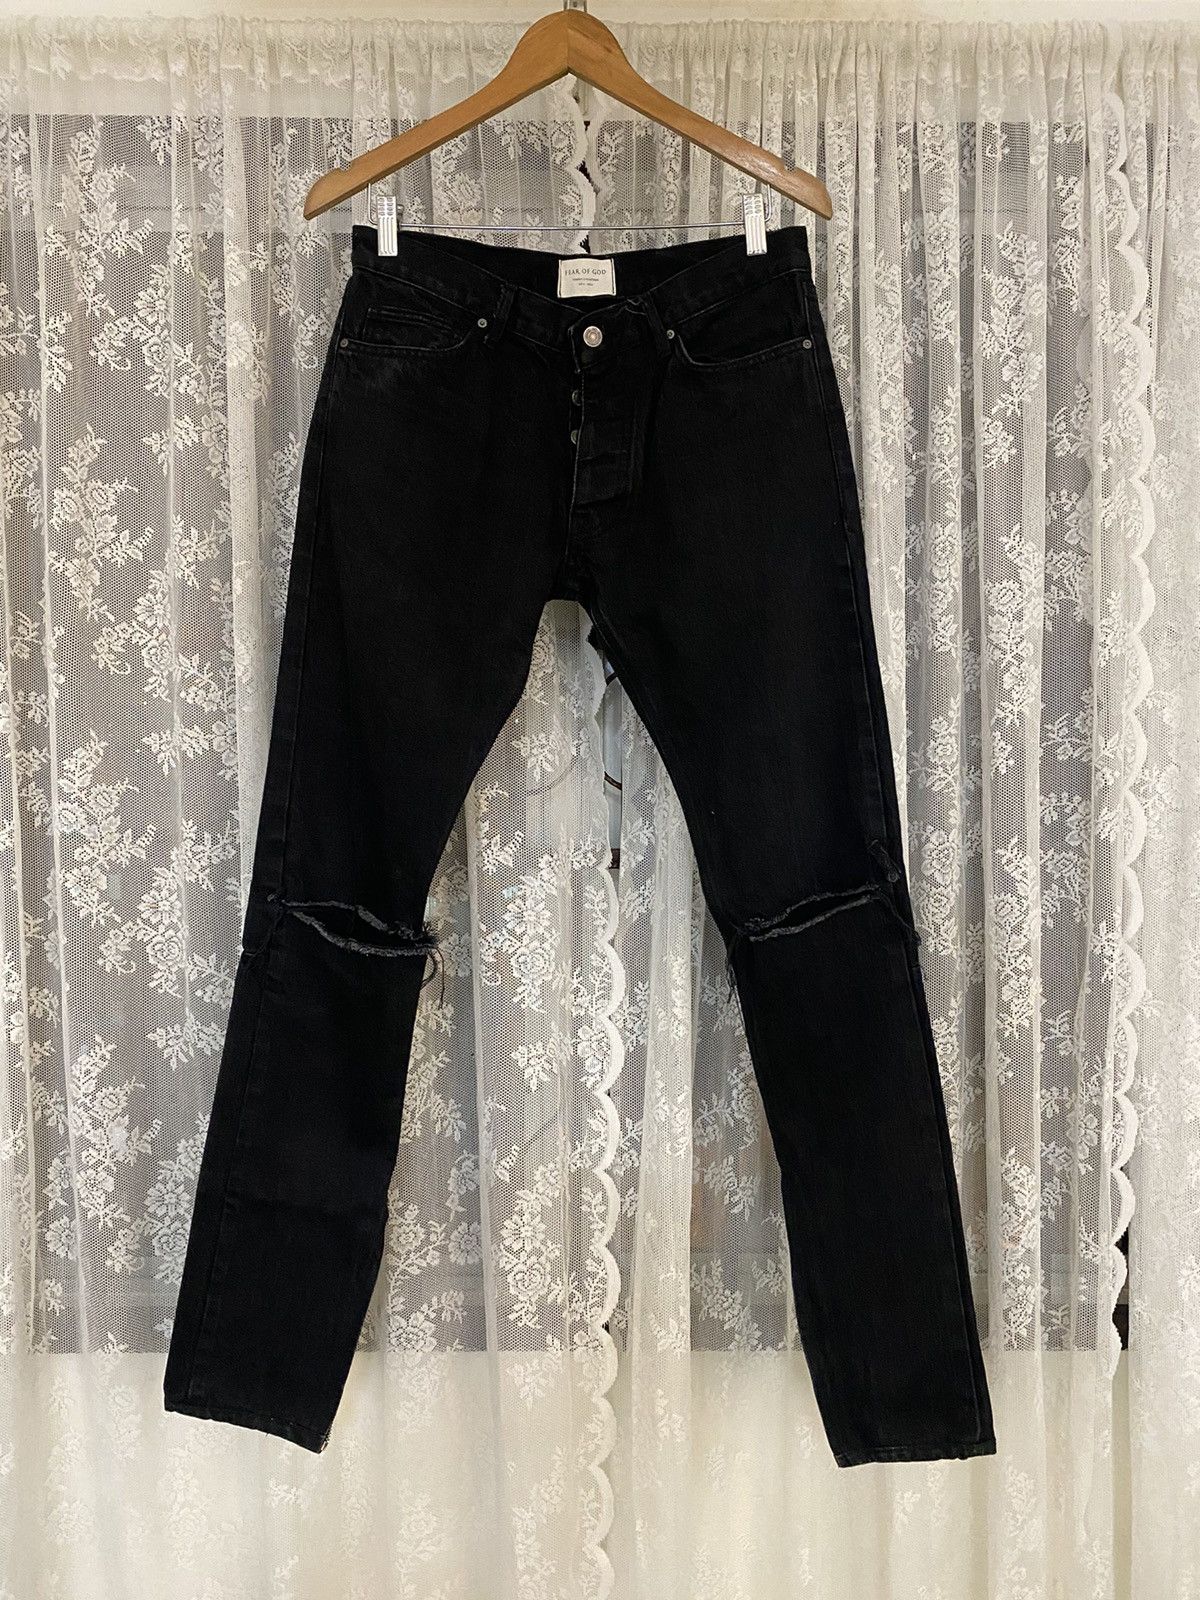 Fear of God Fourth Collection Distressed Denim Jeans - 1